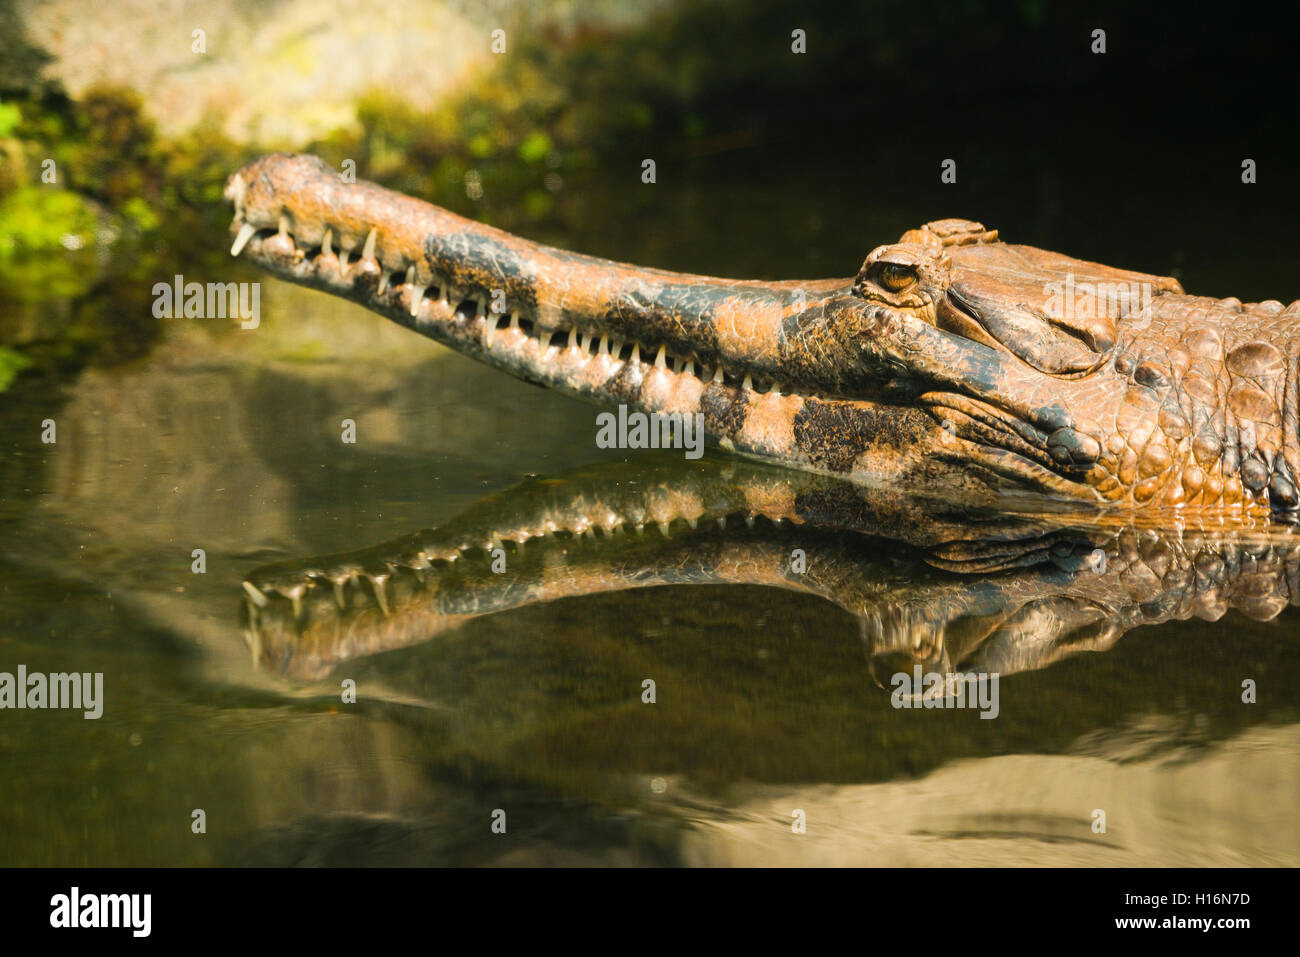 False gharial (Tomistoma schlegelii) in the water, portrait, with reflection, captive Stock Photo